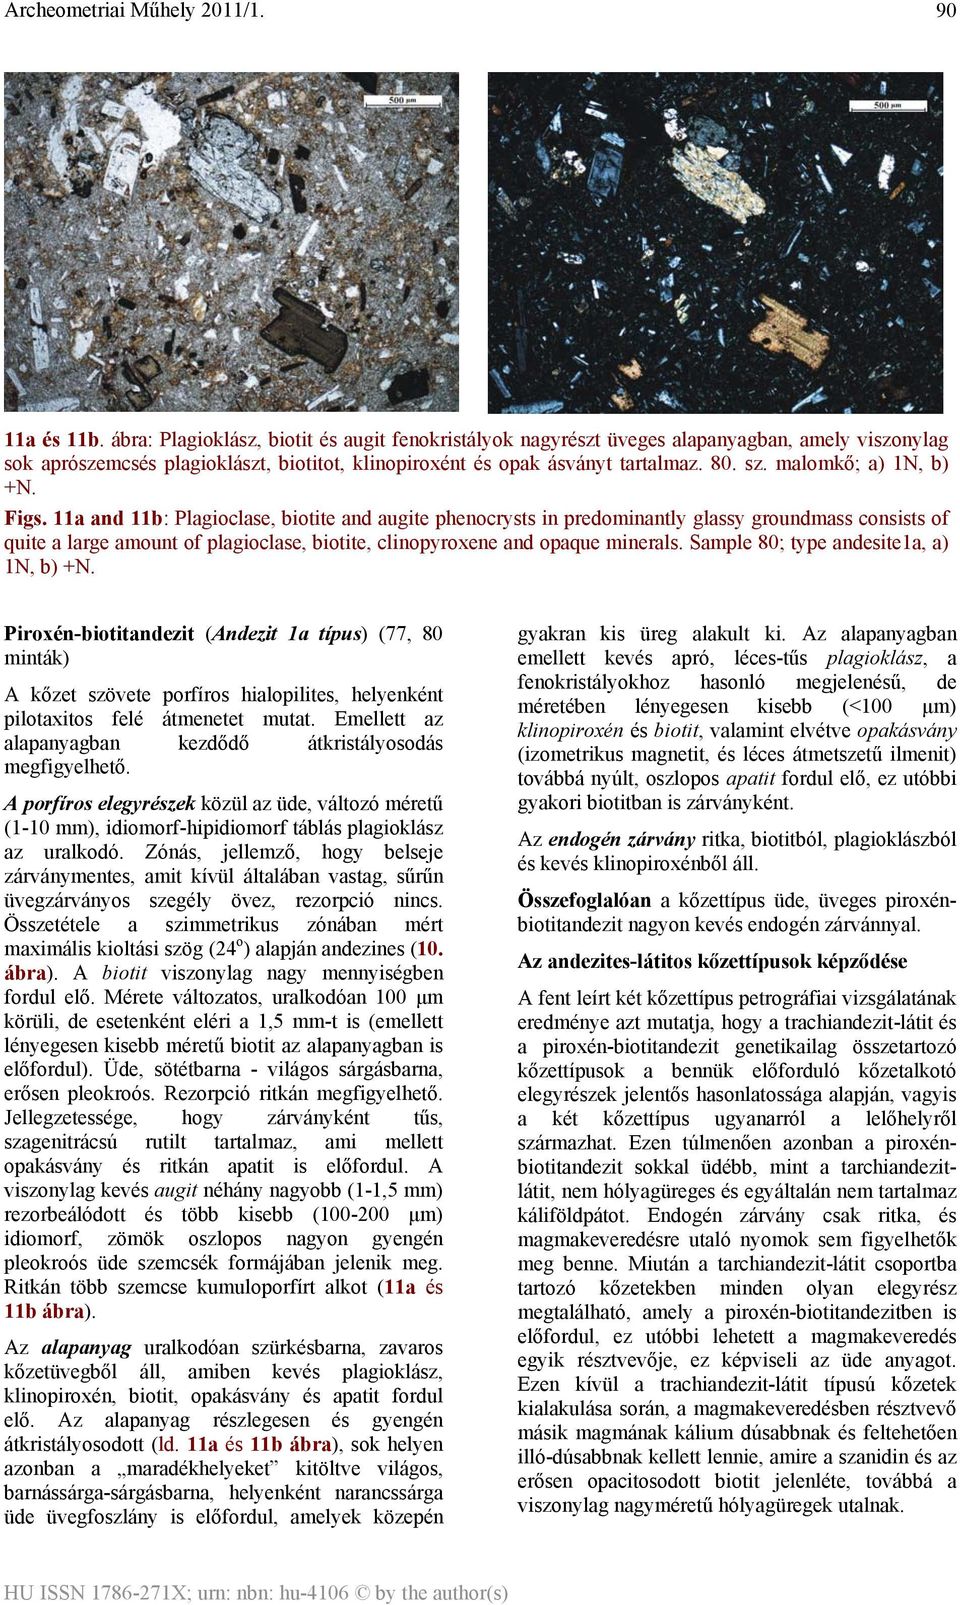 11a and 11b: Plagioclase, biotite and augite phenocrysts in predominantly glassy groundmass consists of quite a large amount of plagioclase, biotite, clinopyroxene and opaque minerals.